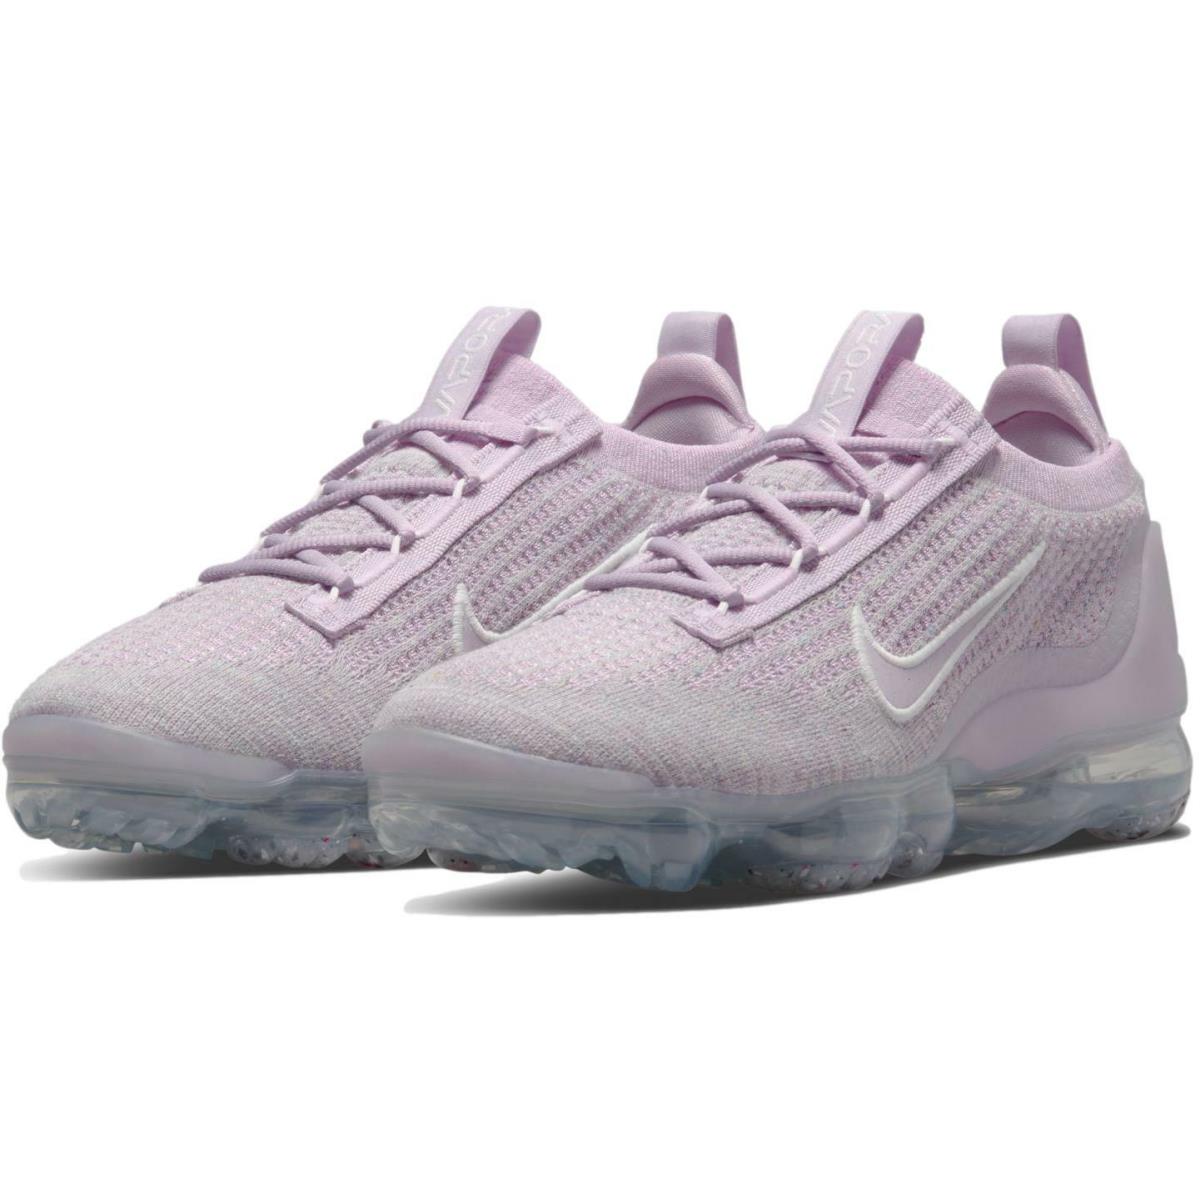 Nike Women`s Air Vapormax 2021 Flyknit `light Arctic Pink` Shoes DH4088-600 - Light Arctic Pink/Iced Lilac